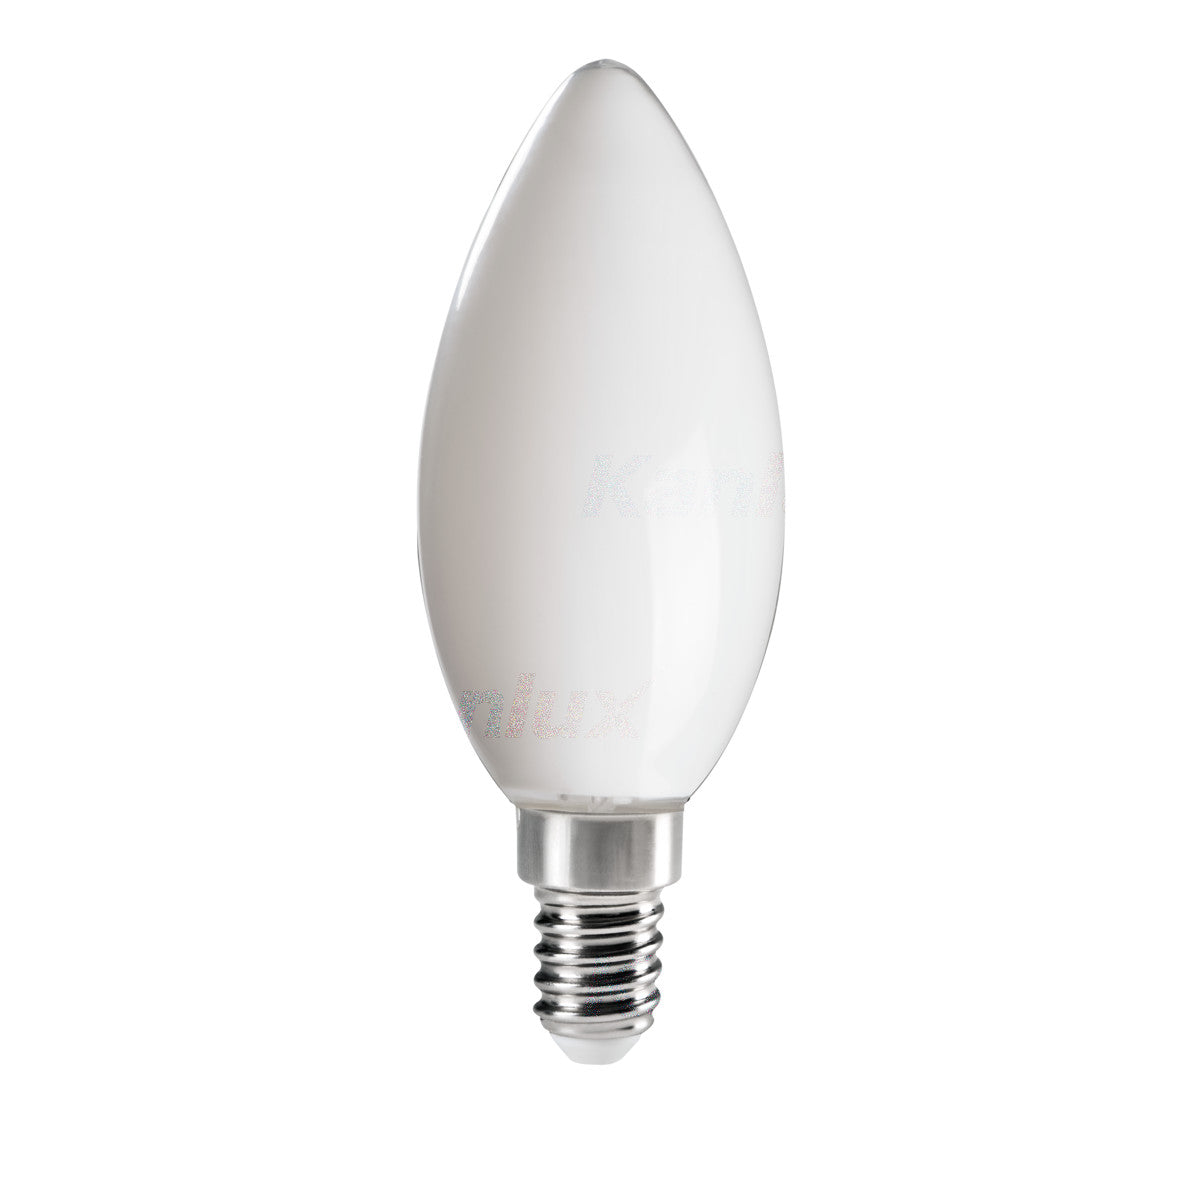 Kanlux XLED C35 E14 6W LED Filament Frosted Milky Candle Light Bulb Lamp